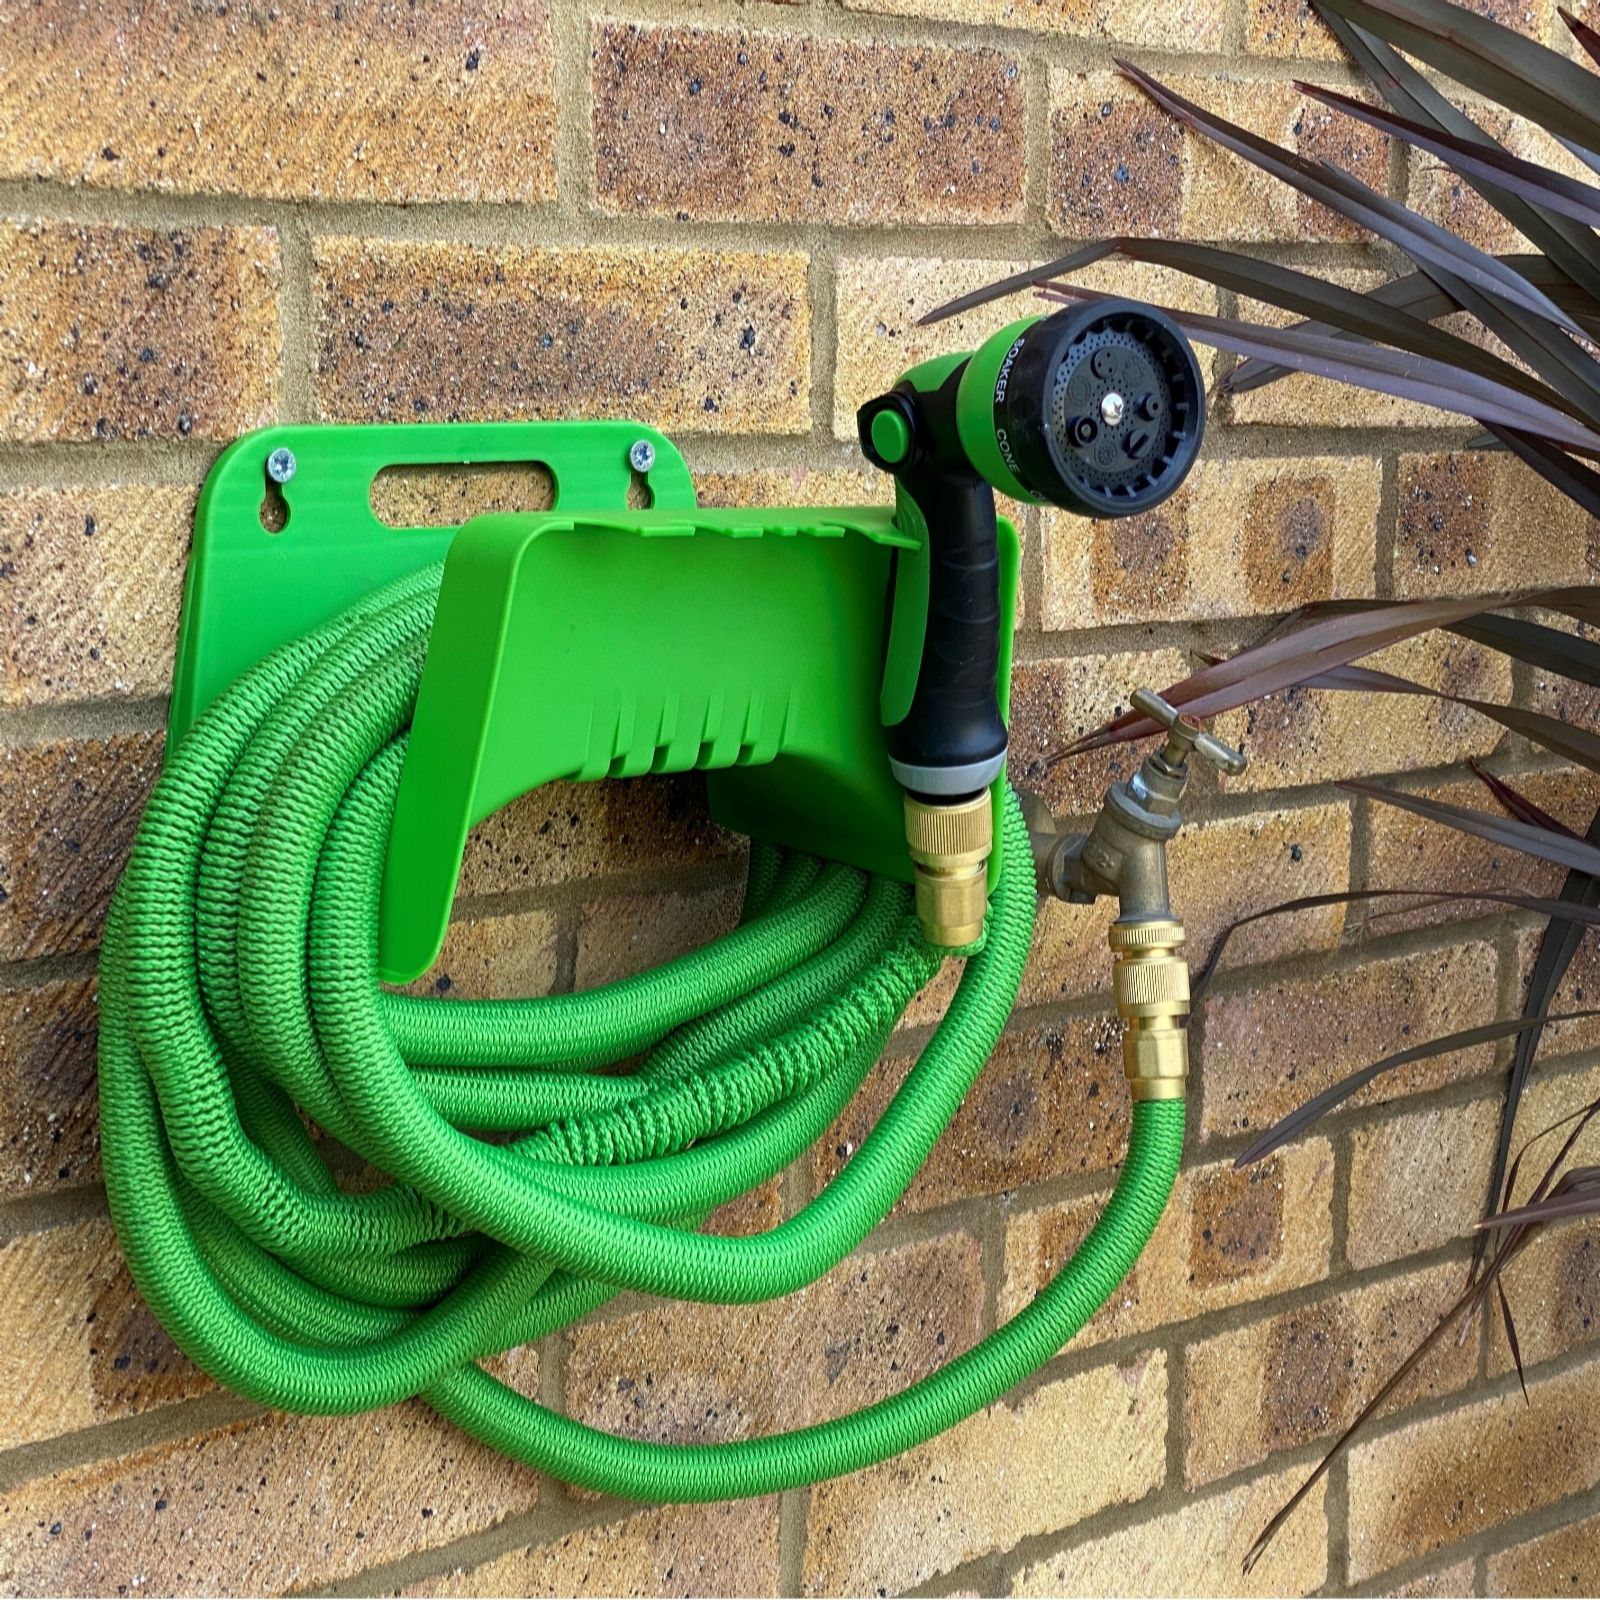 30m Hose Pipe With Starter Nozzle Grab A Bargain Before They All Go 